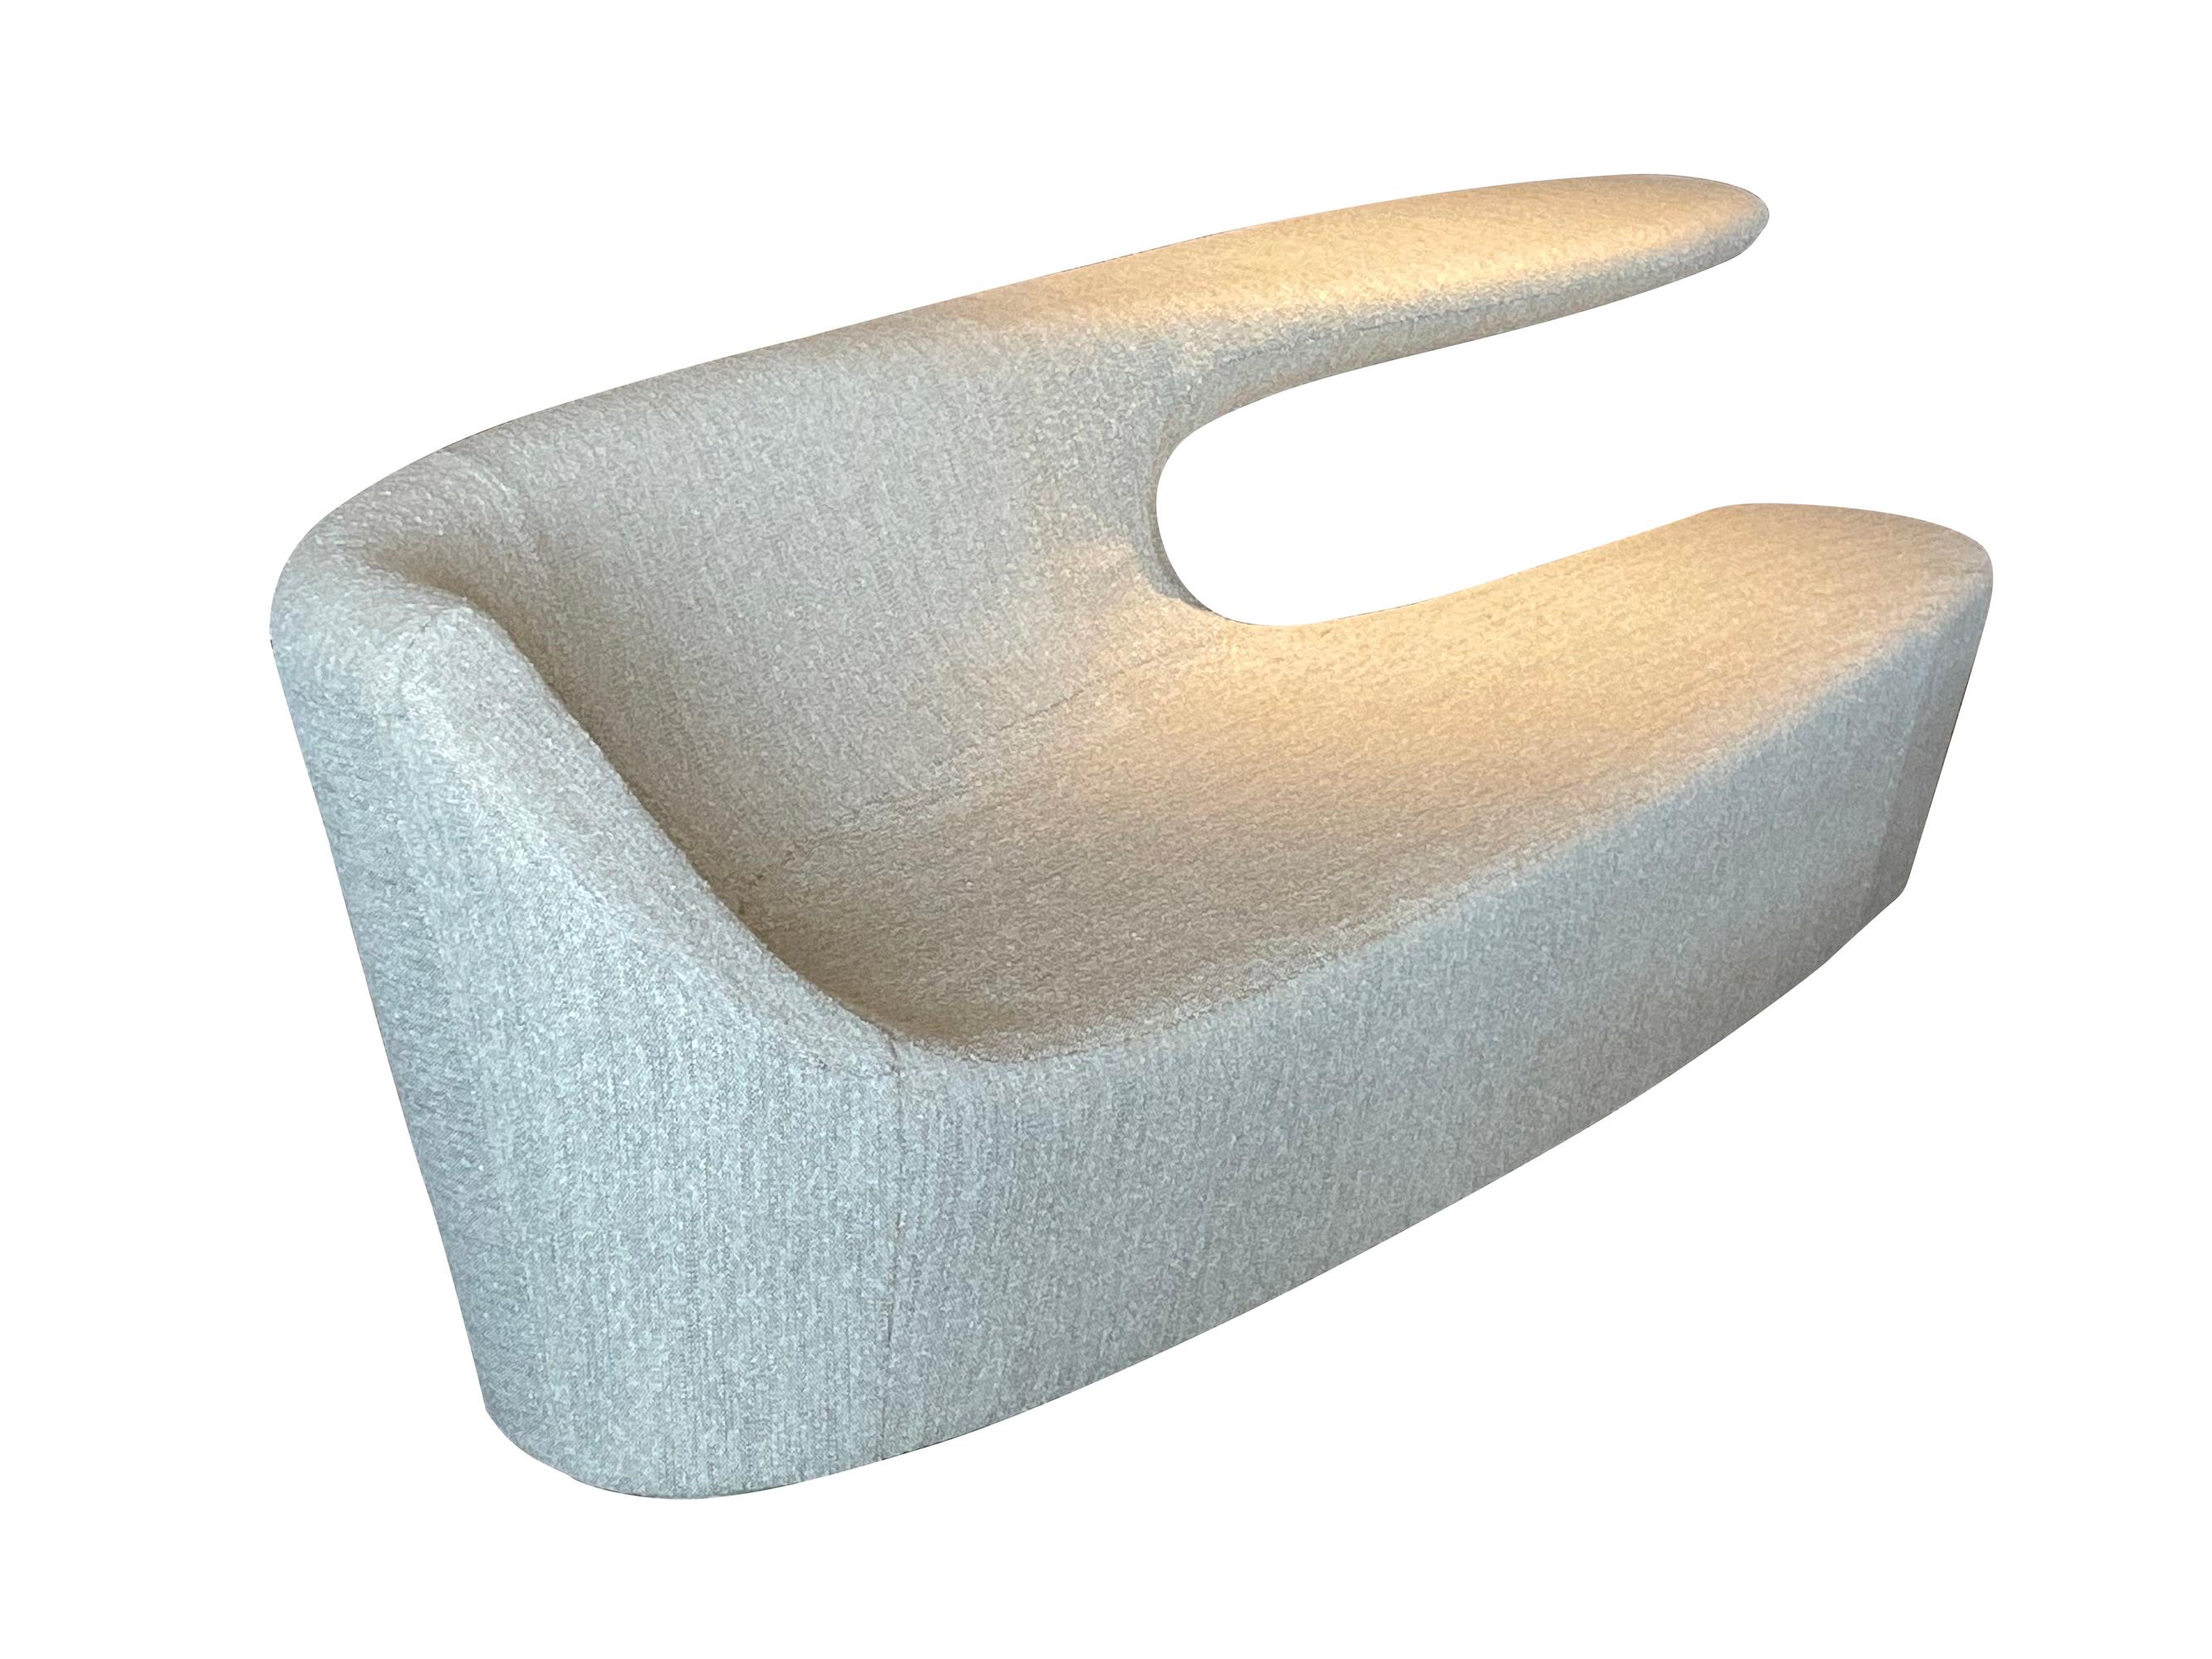 Curved Sculptural Sofa, Spanish, 1980s In Good Condition For Sale In New York, NY